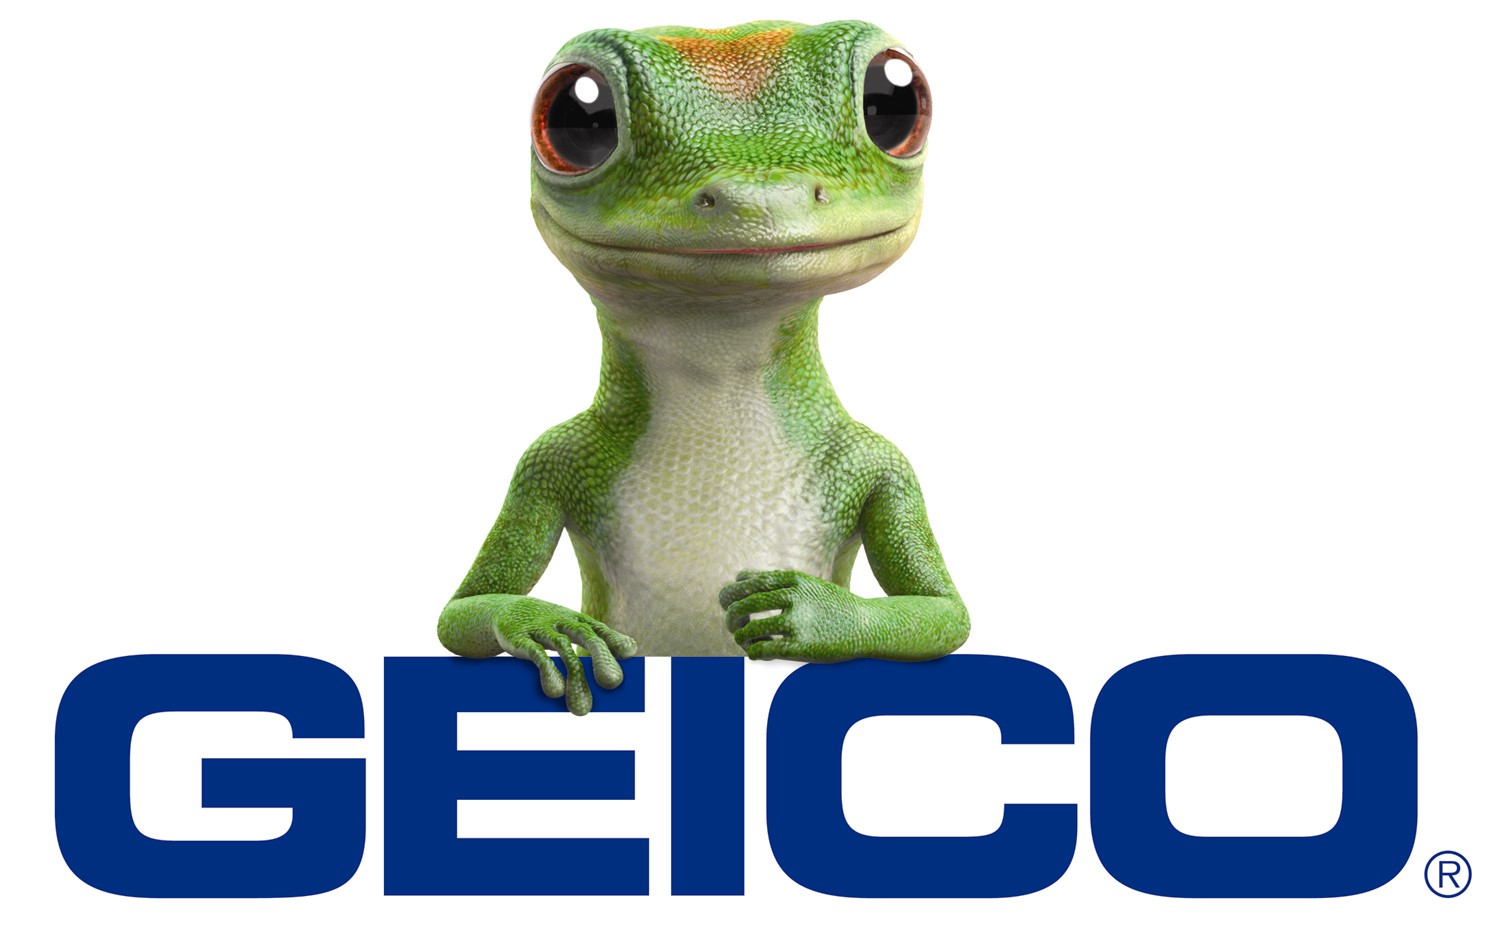 Does GEICO's "15 minutes" tagline work against them in the face of other online competitors?